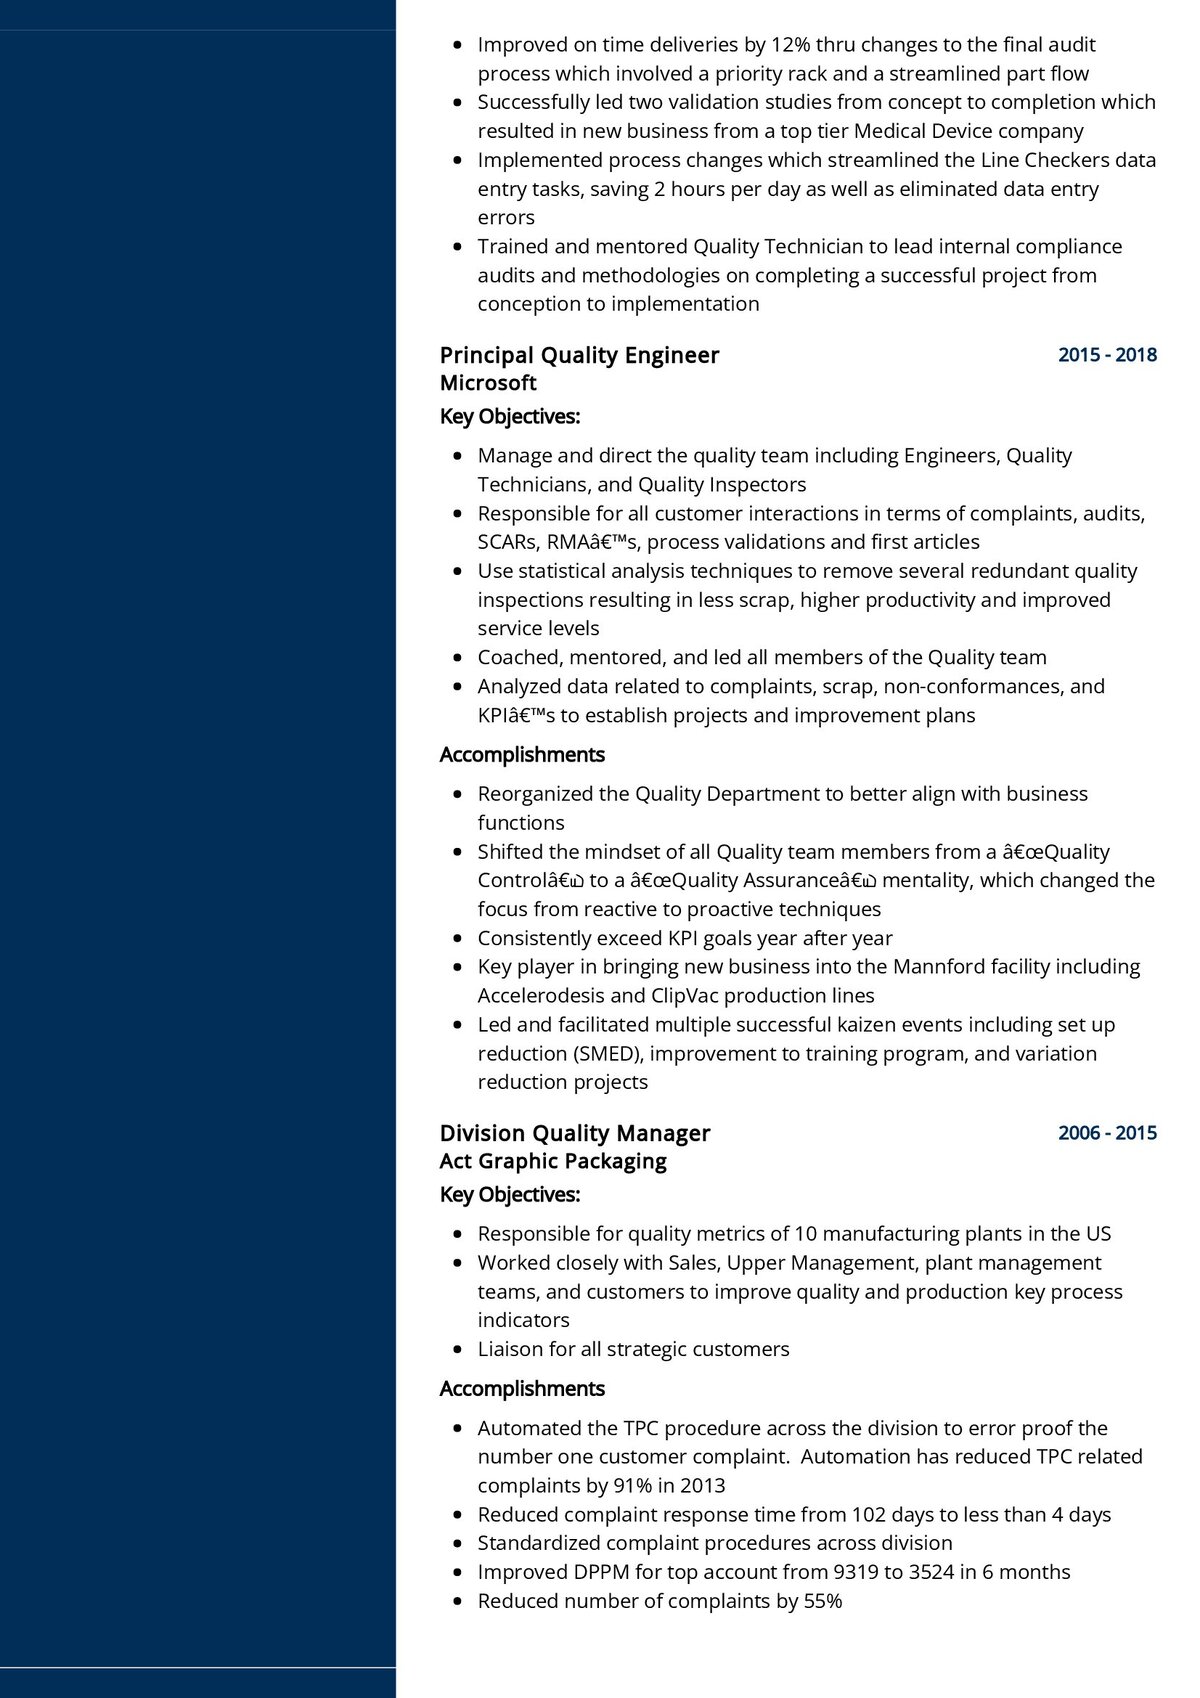 sample resume of quality assurance manager